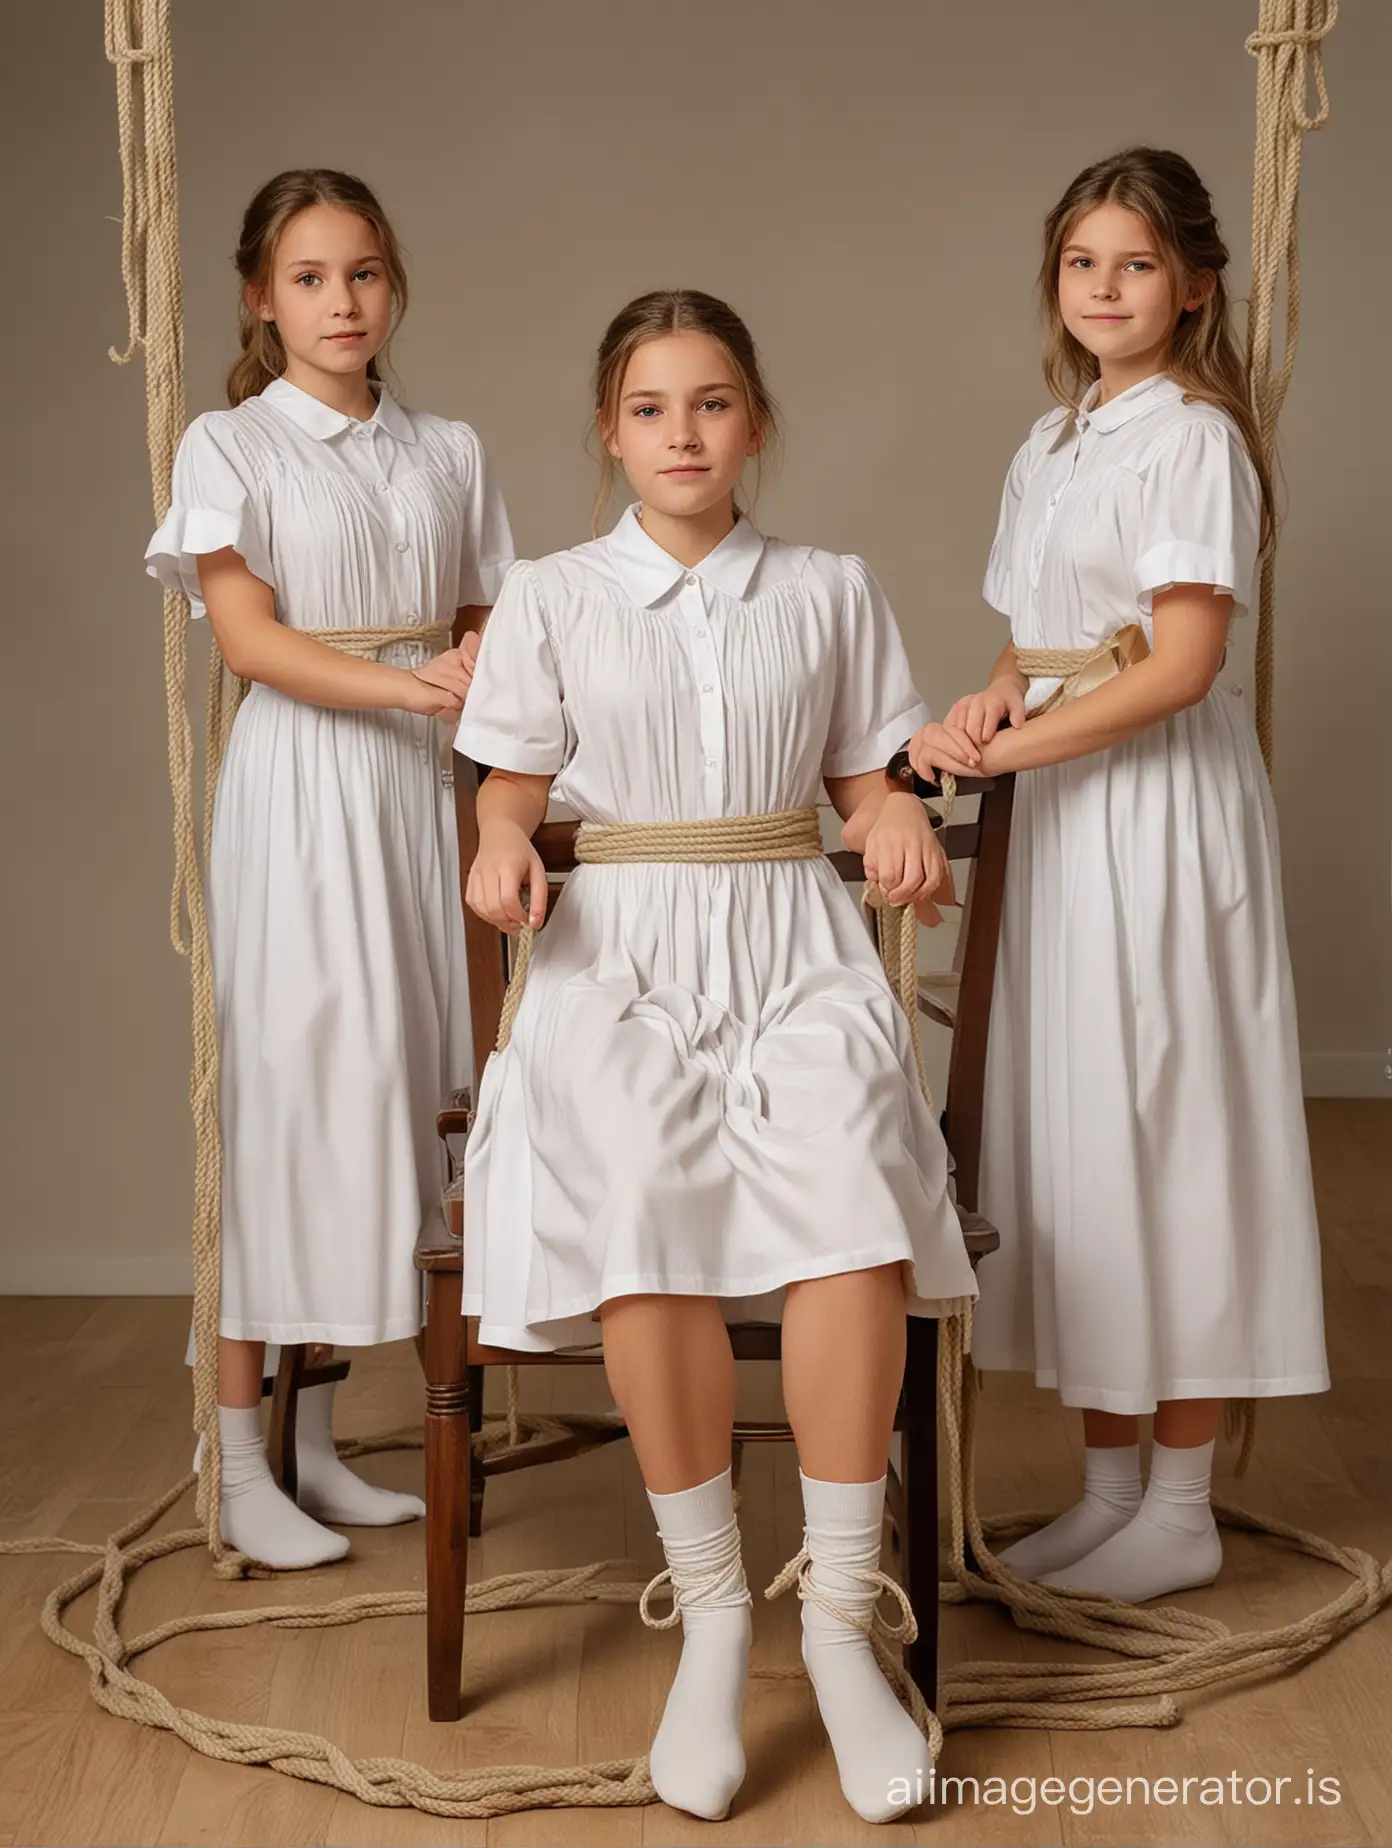 A girl in a white choir dress sitting on a chair, hands and feet tied up with a lot of rope.